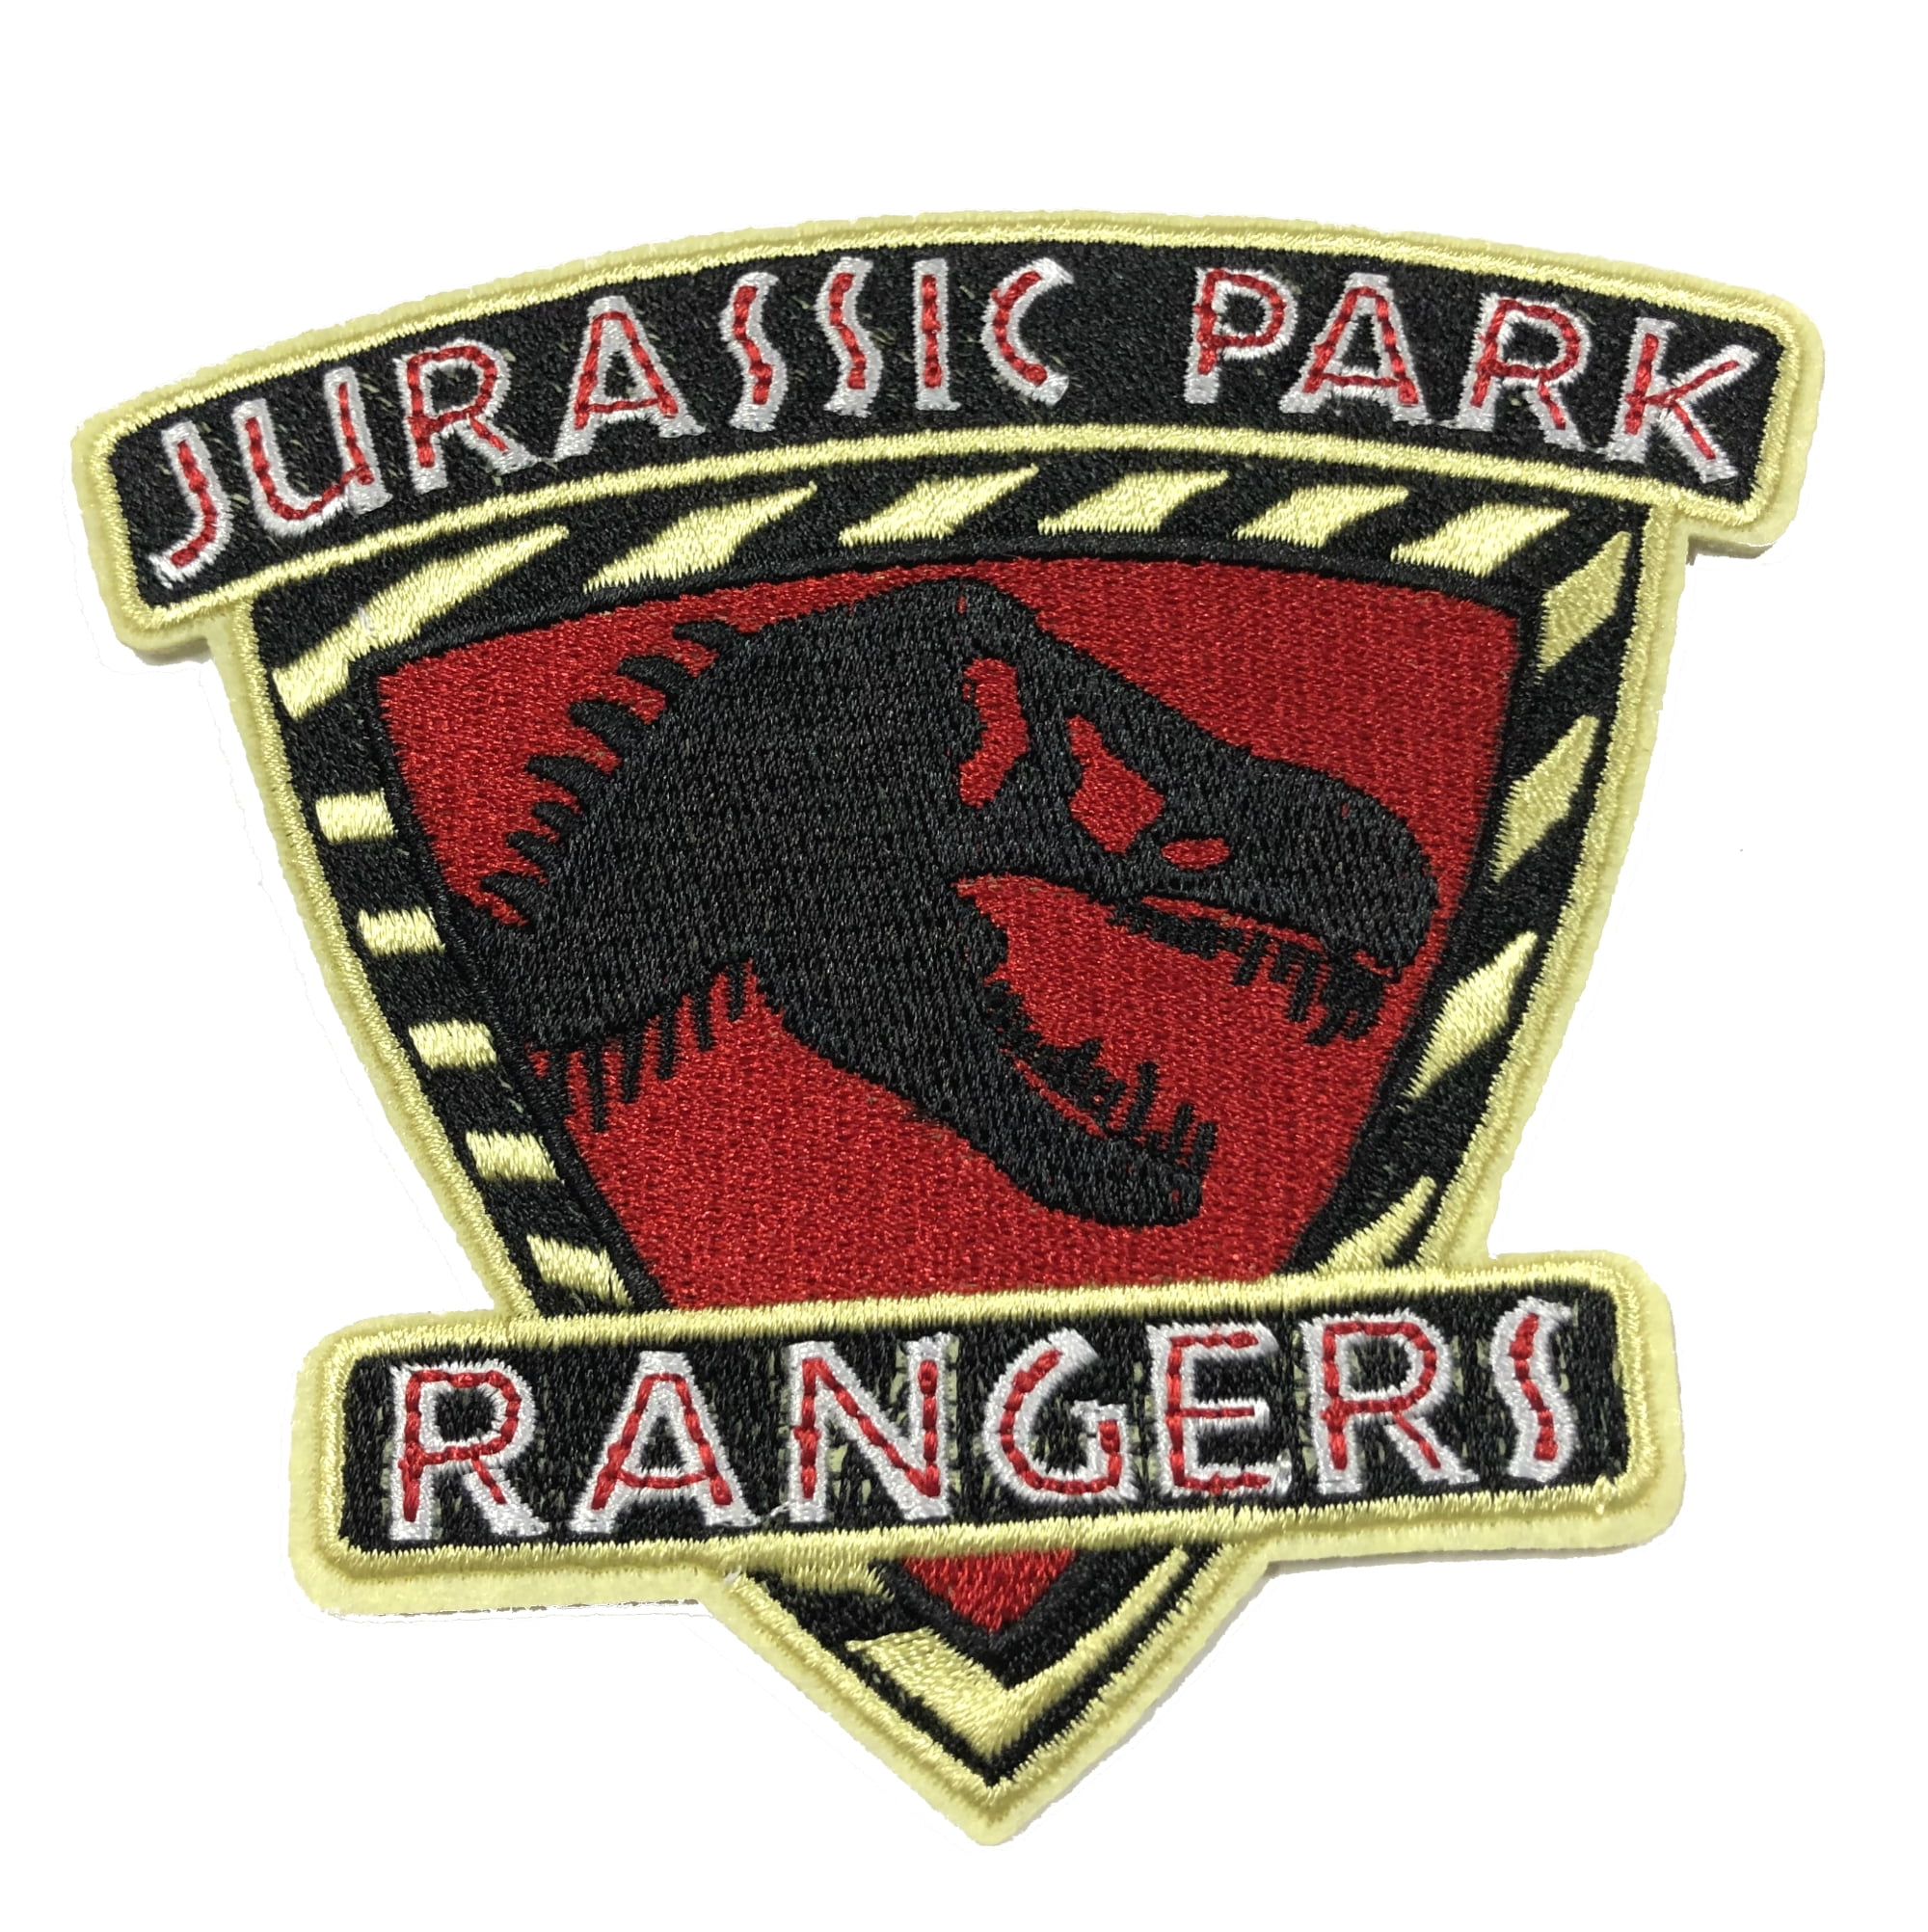 Dinosaur Patch Iron on Parasaurolophus Patch Embroidered Dino Patch Dinosaur Badge Jurassic Motif Appliqué Clothes Patch Quality